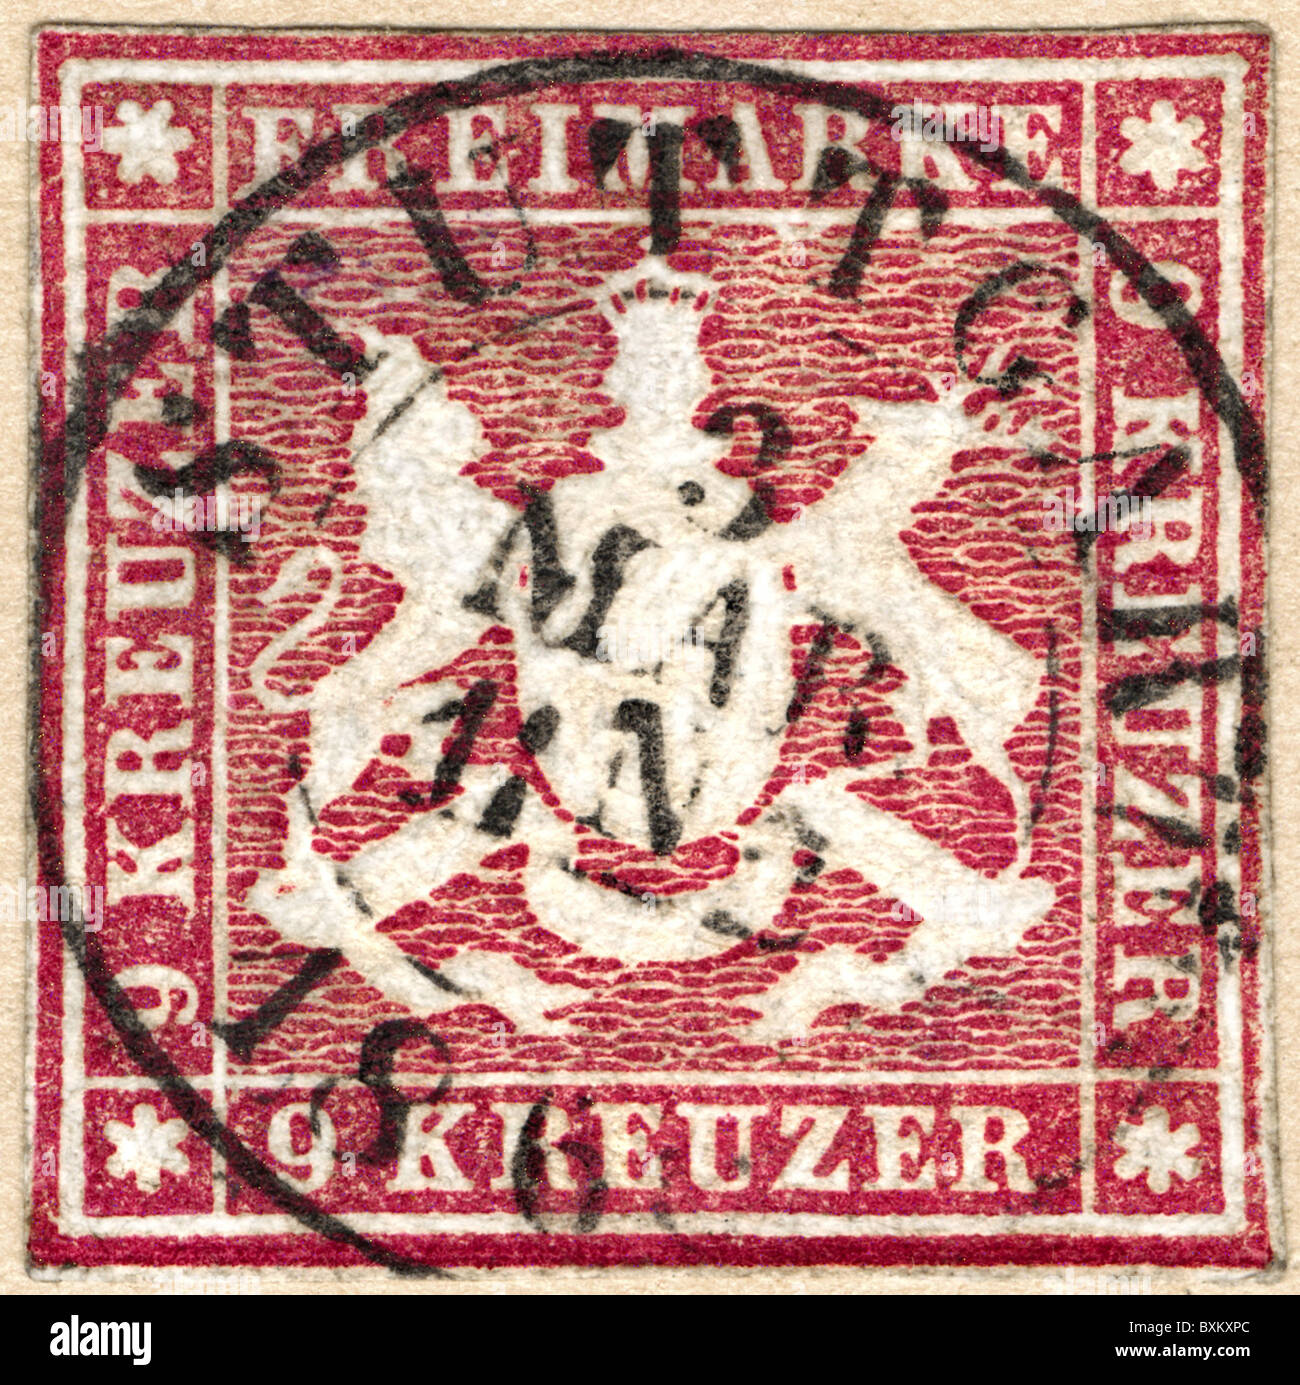 stamps, Germany, Wuerttemberg, kingdom, postage stamp, 9 Kreuzer, stamped, Stuttgart, 3.3.1860, Additional-Rights-Clearences-Not Available Stock Photo